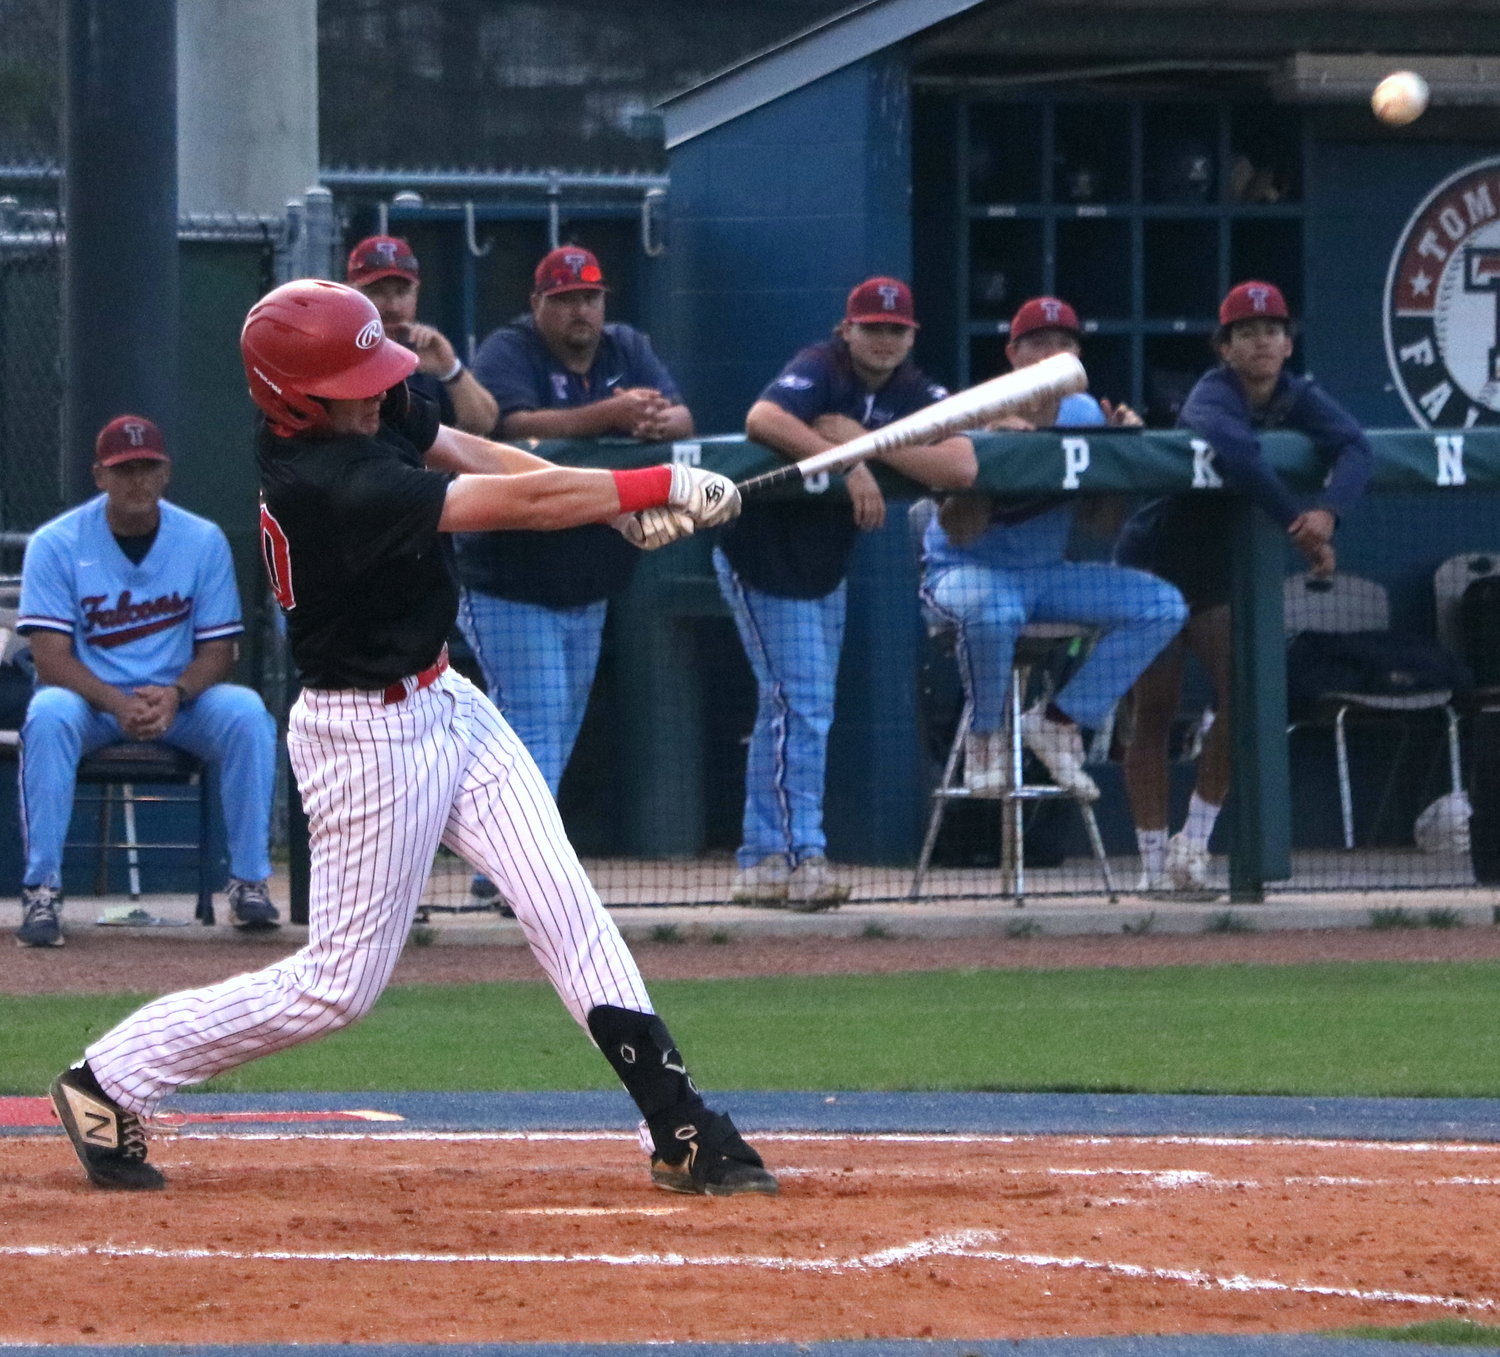 Sutton Hull hits during Tuesday’s District 19-6A game between Katy and Tompkins at the Tompkins baseball field.